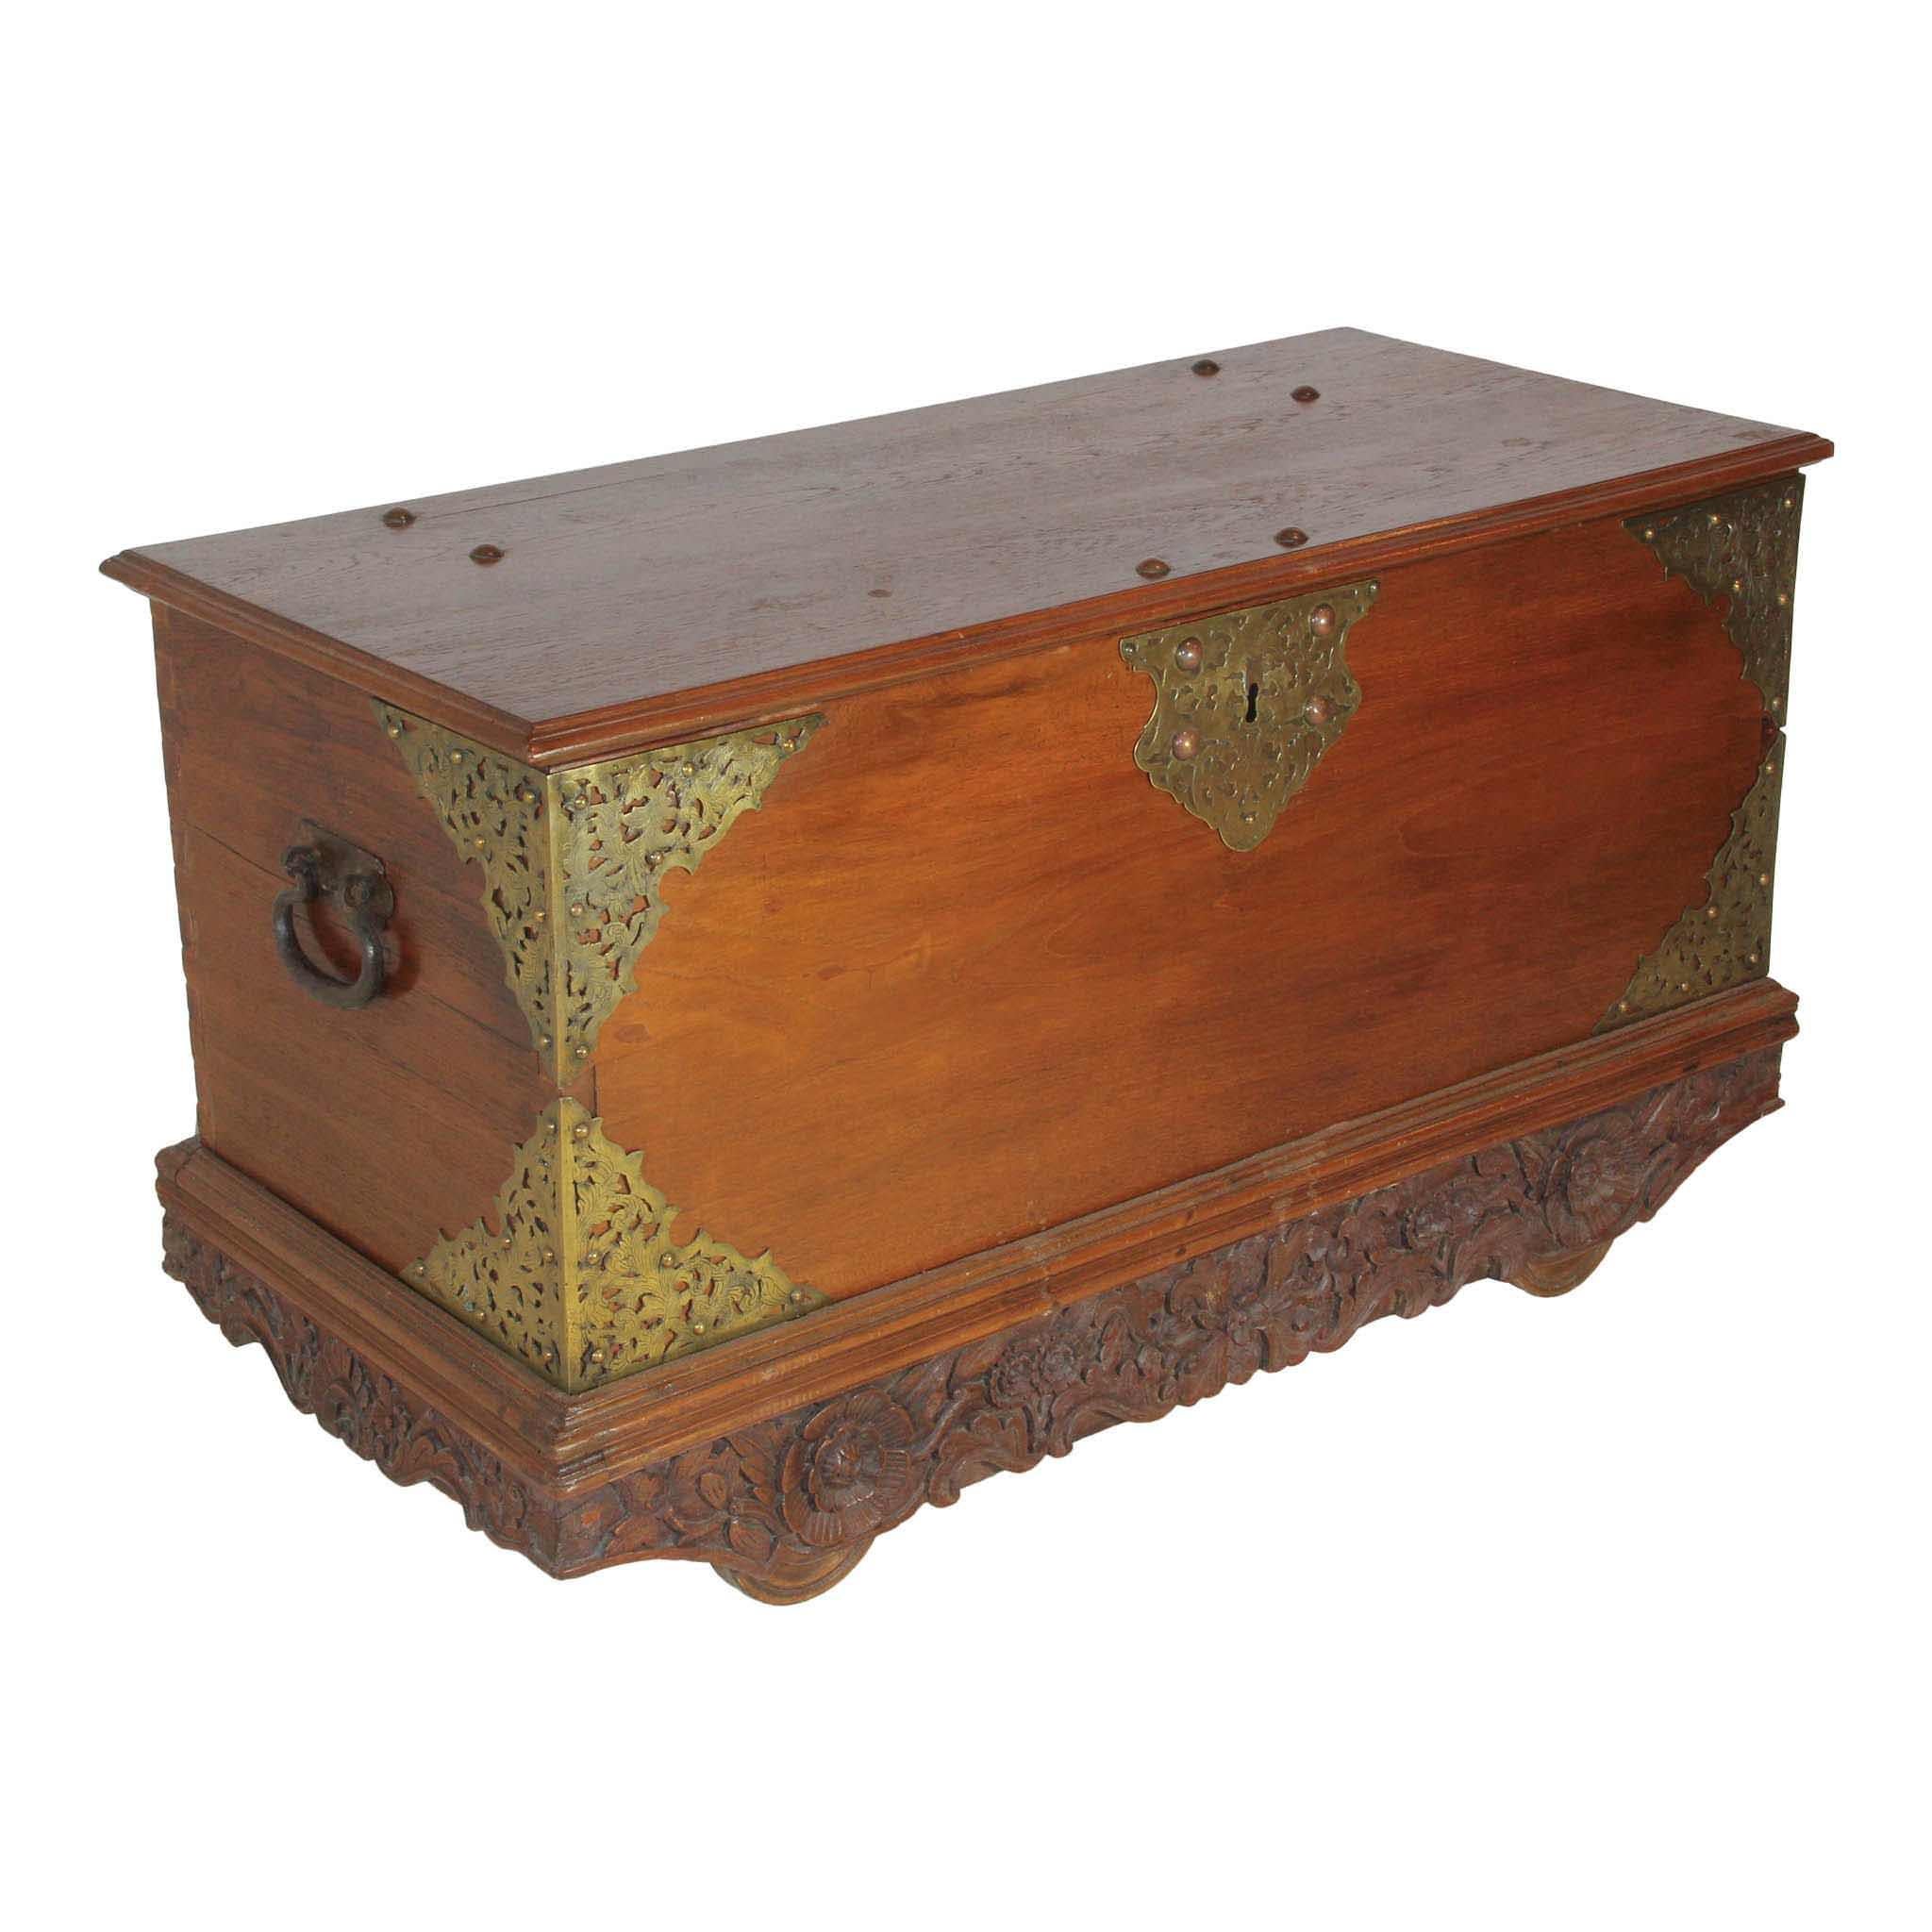 Beautiful hardwood trunk with decorative brass corners and key plate. Lovely carved floral and foliage trim adorns a bottom apron around the base of the trunk. Four iron wheels beneath the trunk make it easier to transport.